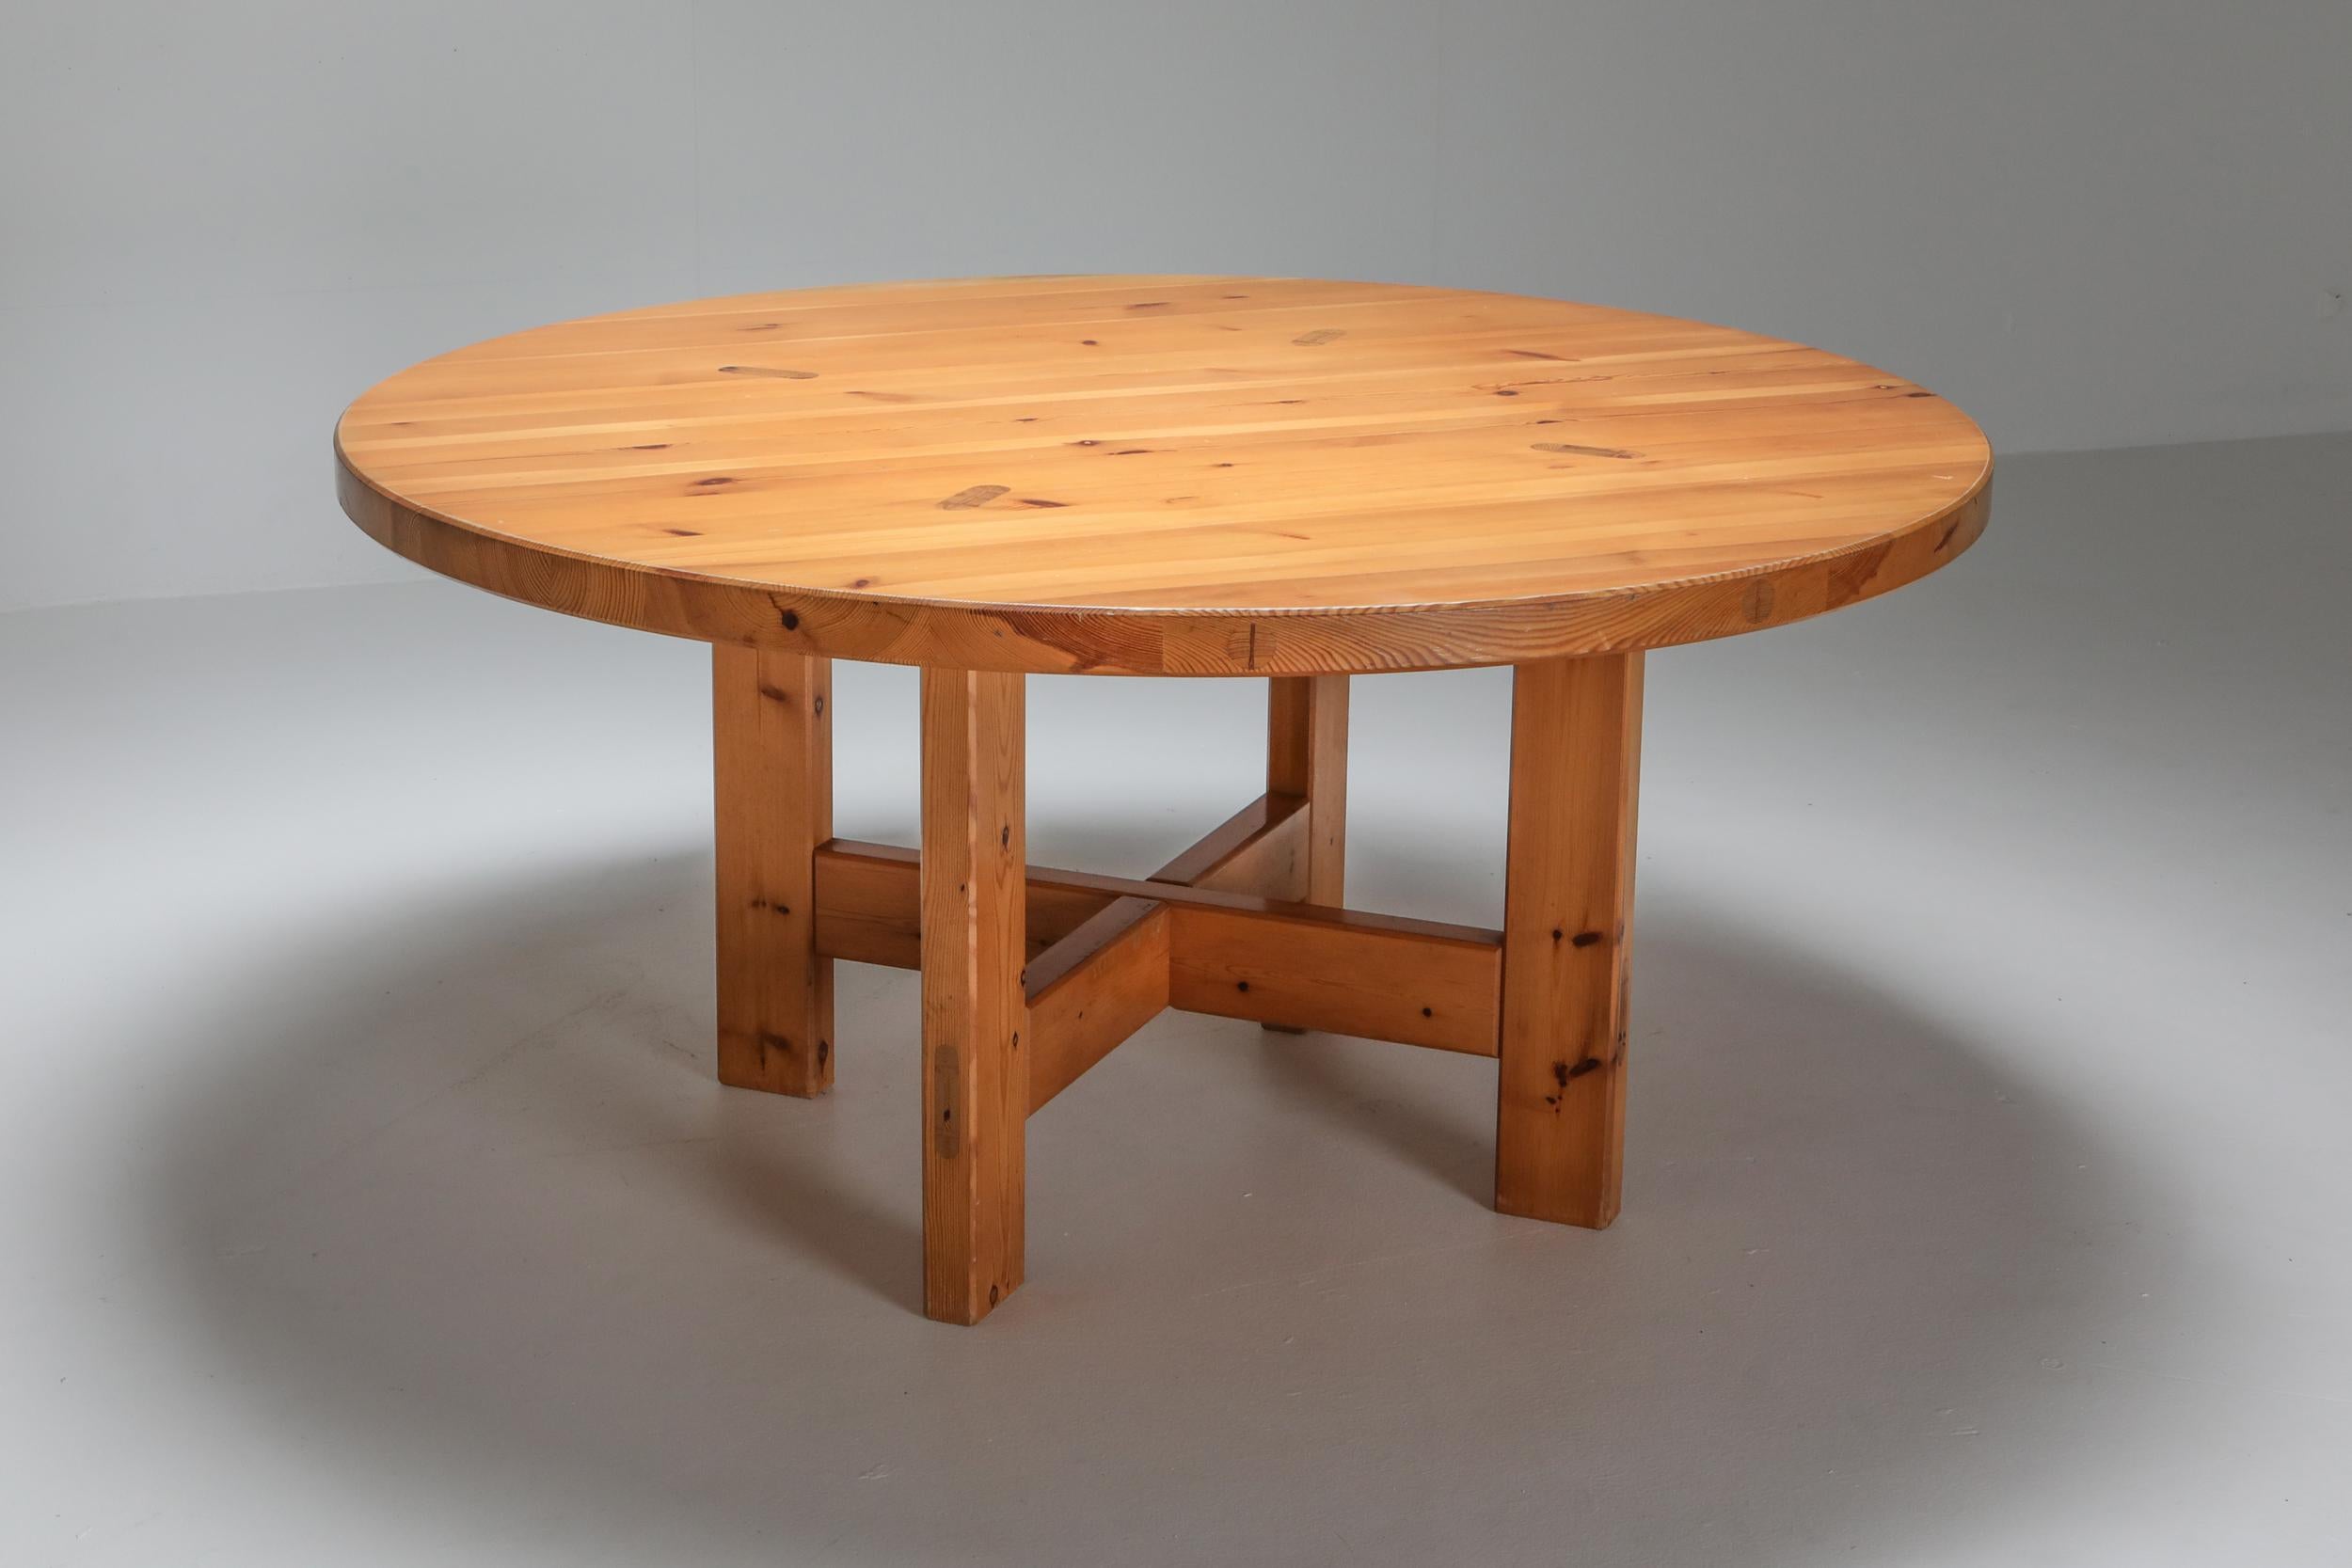 Roland Wilhelmsson; 1960s; Sweden

A Roland Wilhelmsson solid pine dining table for Karl Anderson & Söner, Sweden. The table is made of round top resting on four feet. The feet are fixed to the top with beautiful and expressive connections.